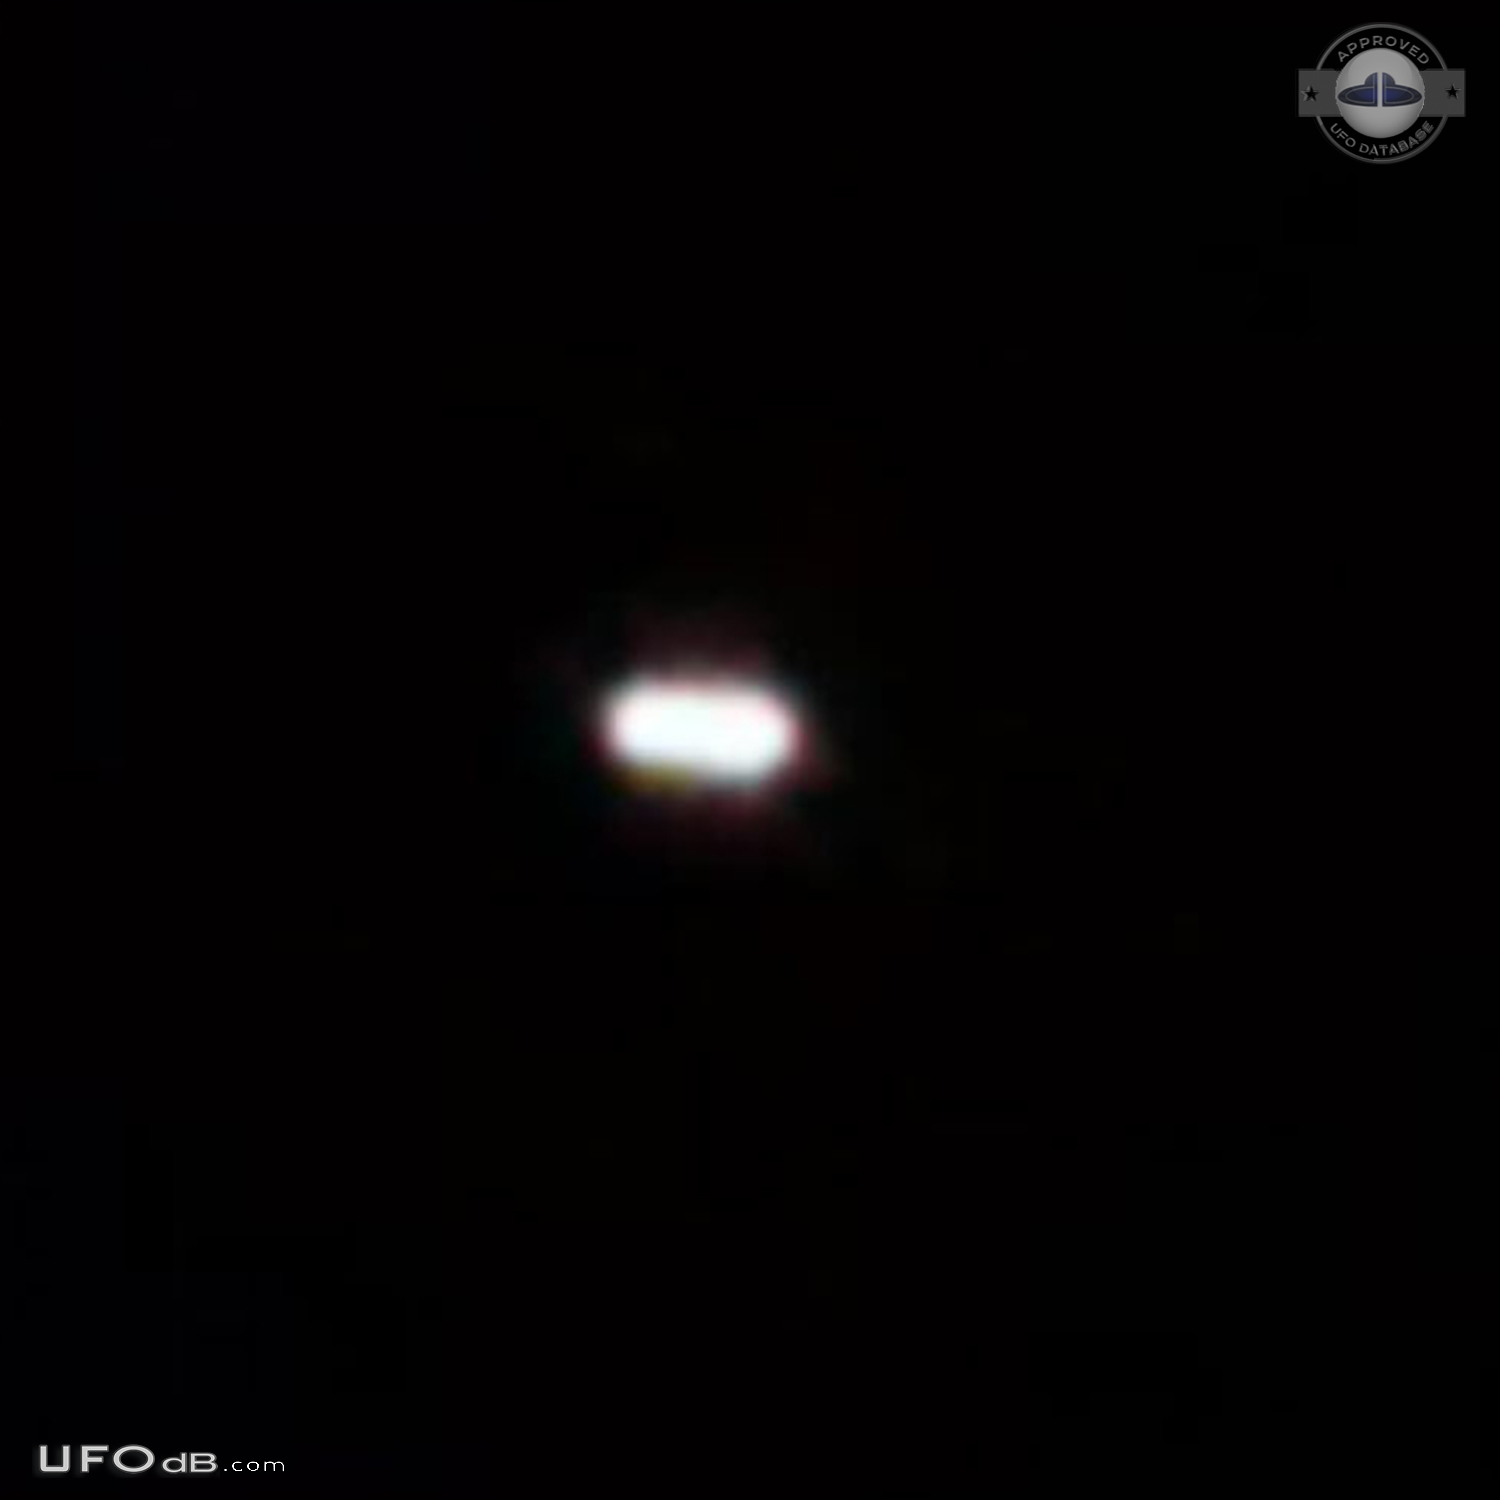 Oval UFO like a star but it disappeared - Bergen New York USA 2015 UFO Picture #731-3